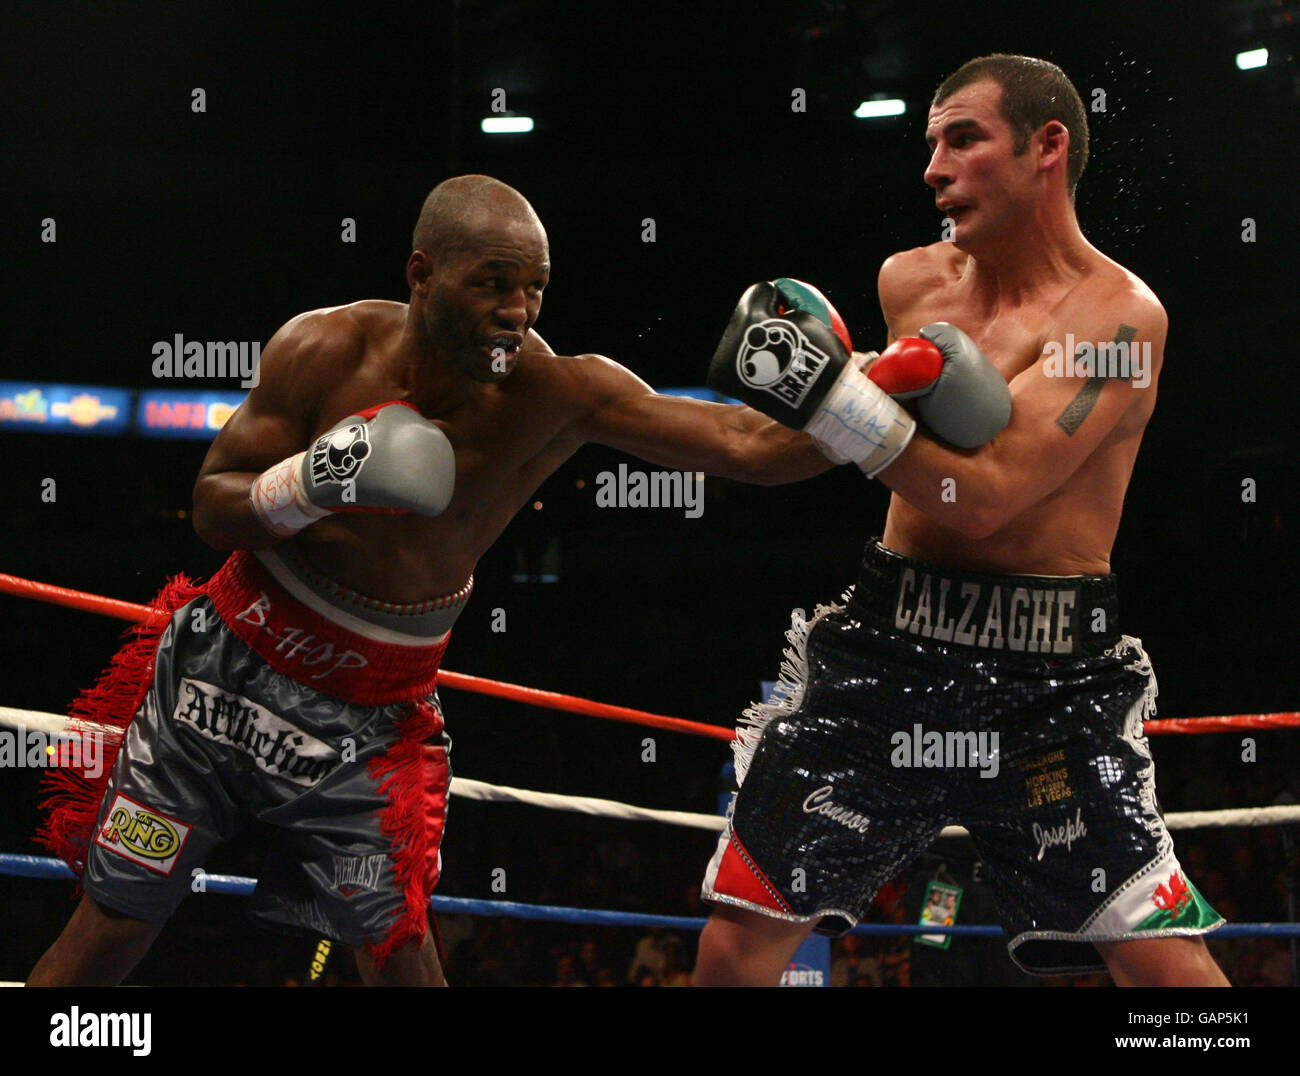 Wales' Joe Calzaghe is punched by left hand of Bernard Hopkins during the Light-Heavyweight Title at Thomas & Mack Center, Las Vegas, USA. Stock Photo